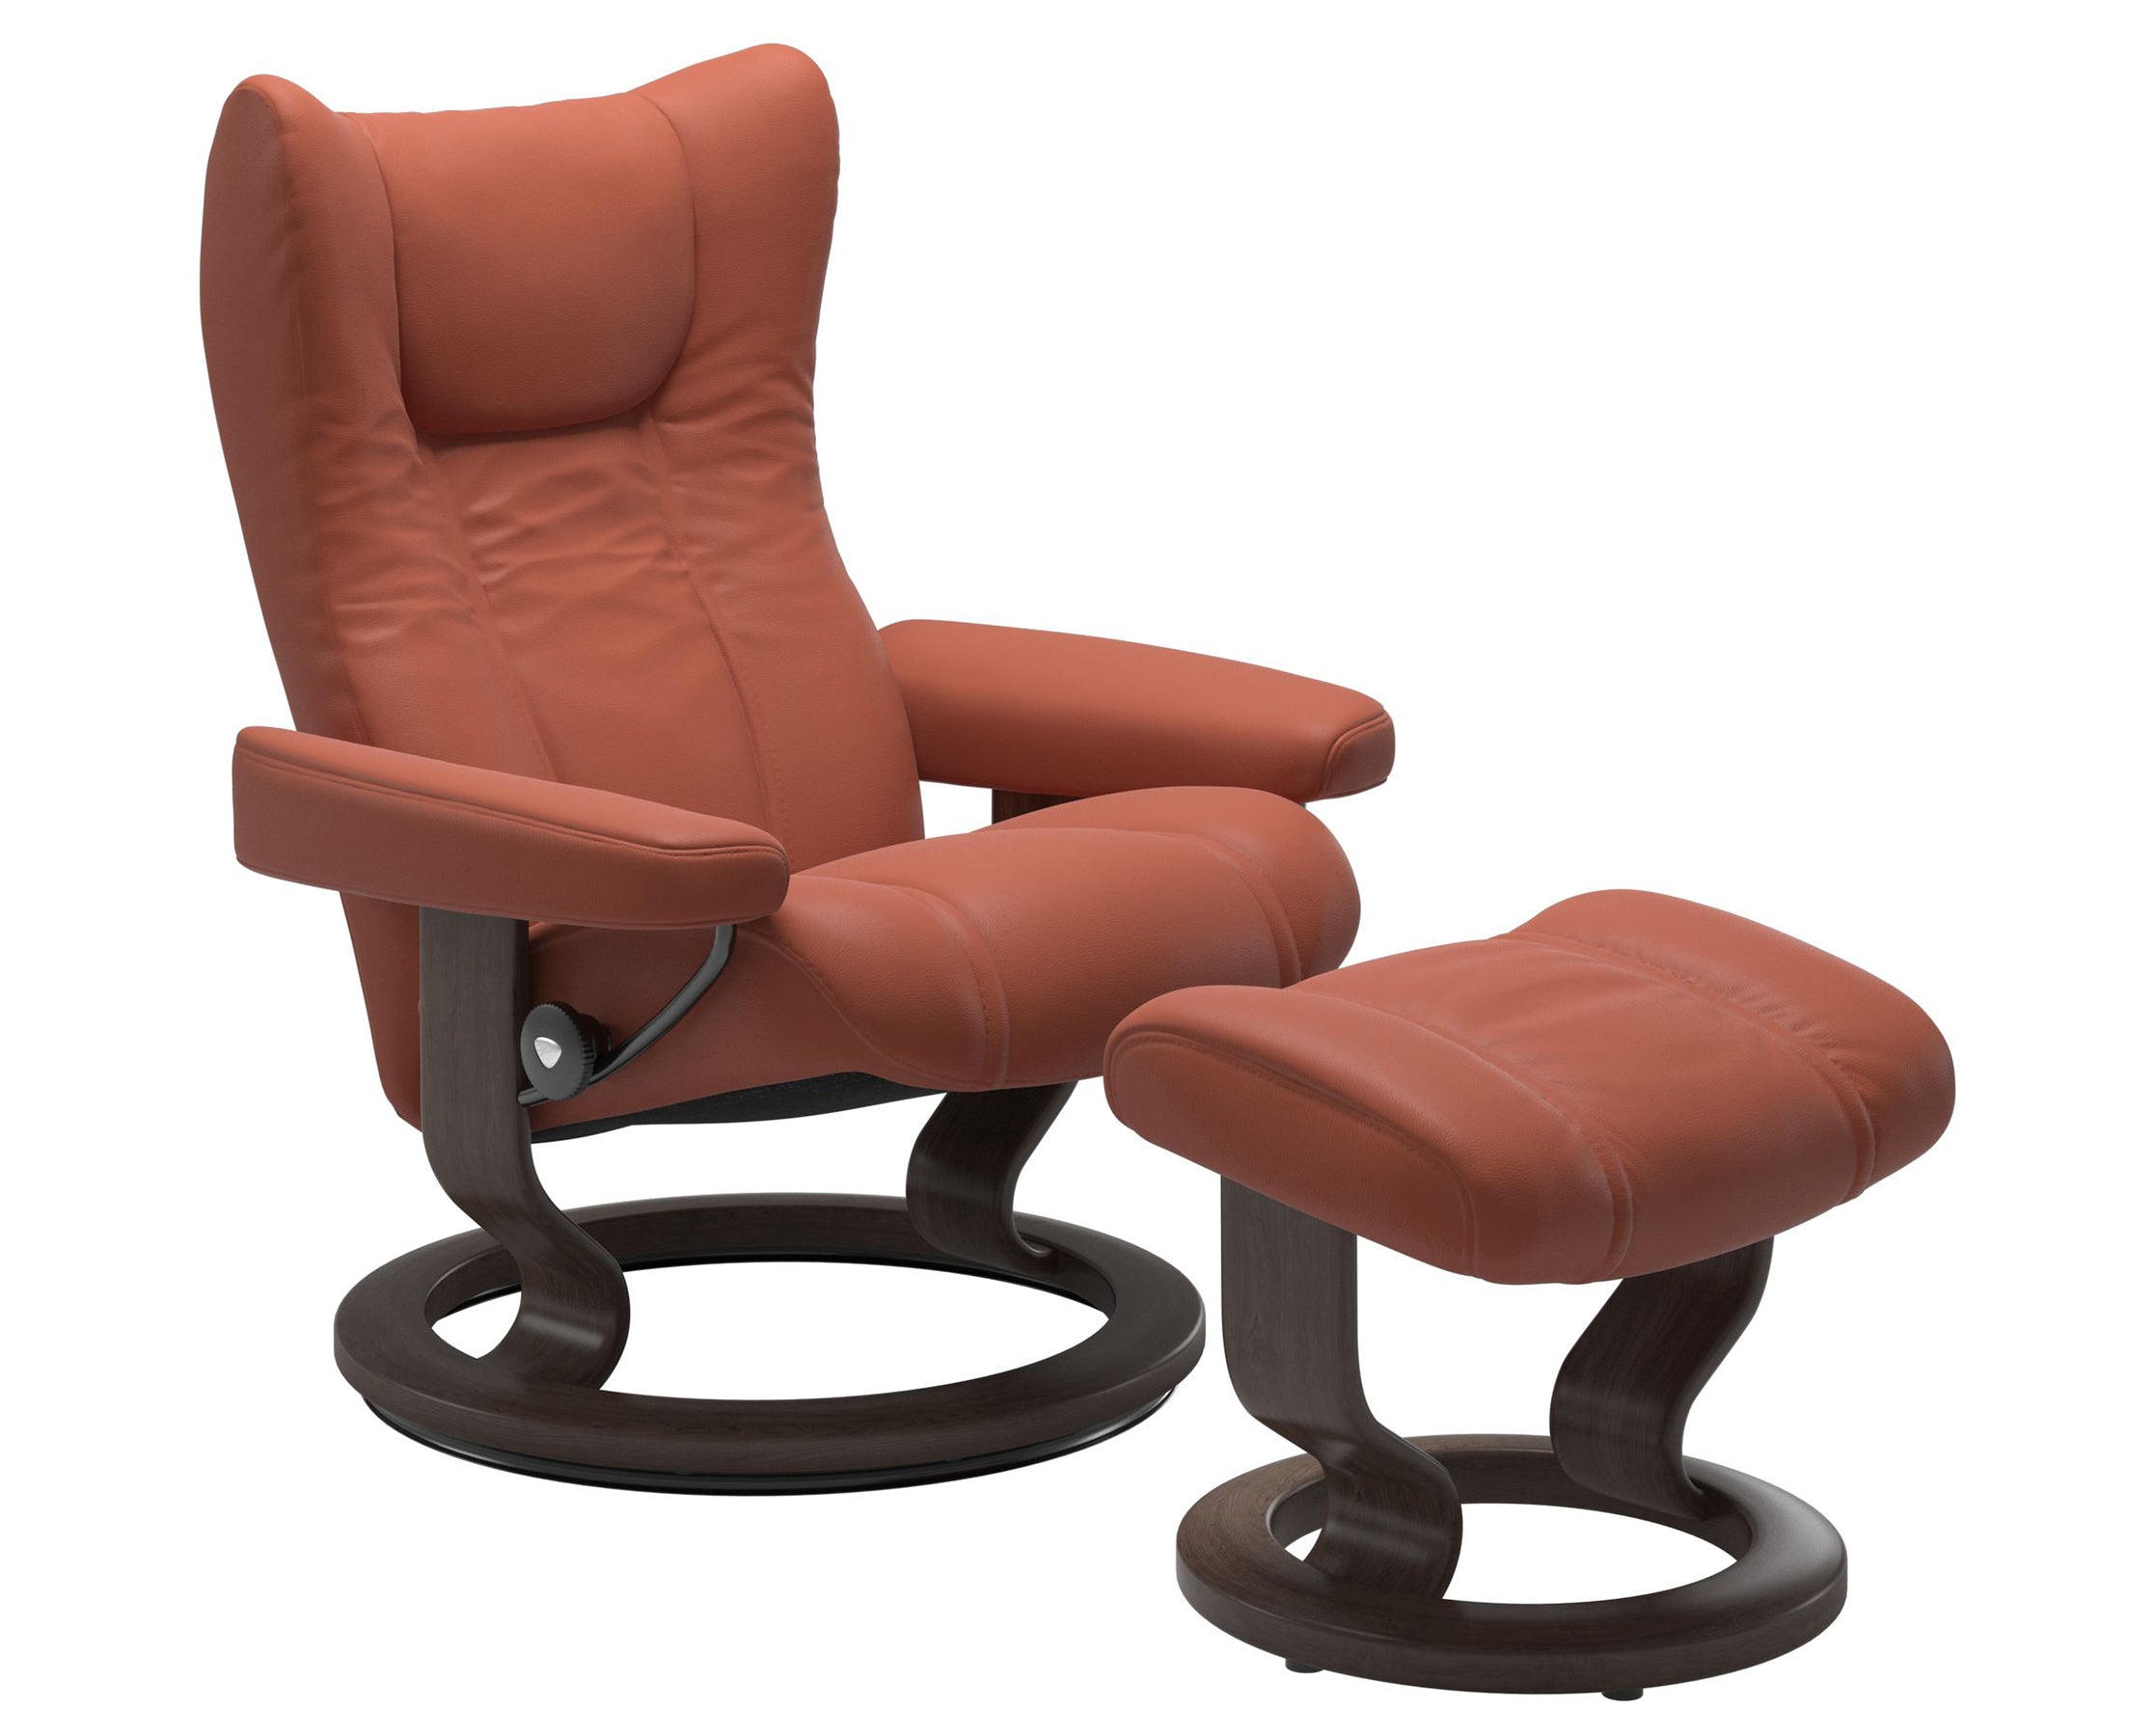 Paloma Leather Henna S/M/L and Wenge Base | Stressless Wing Classic Recliner | Valley Ridge Furniture